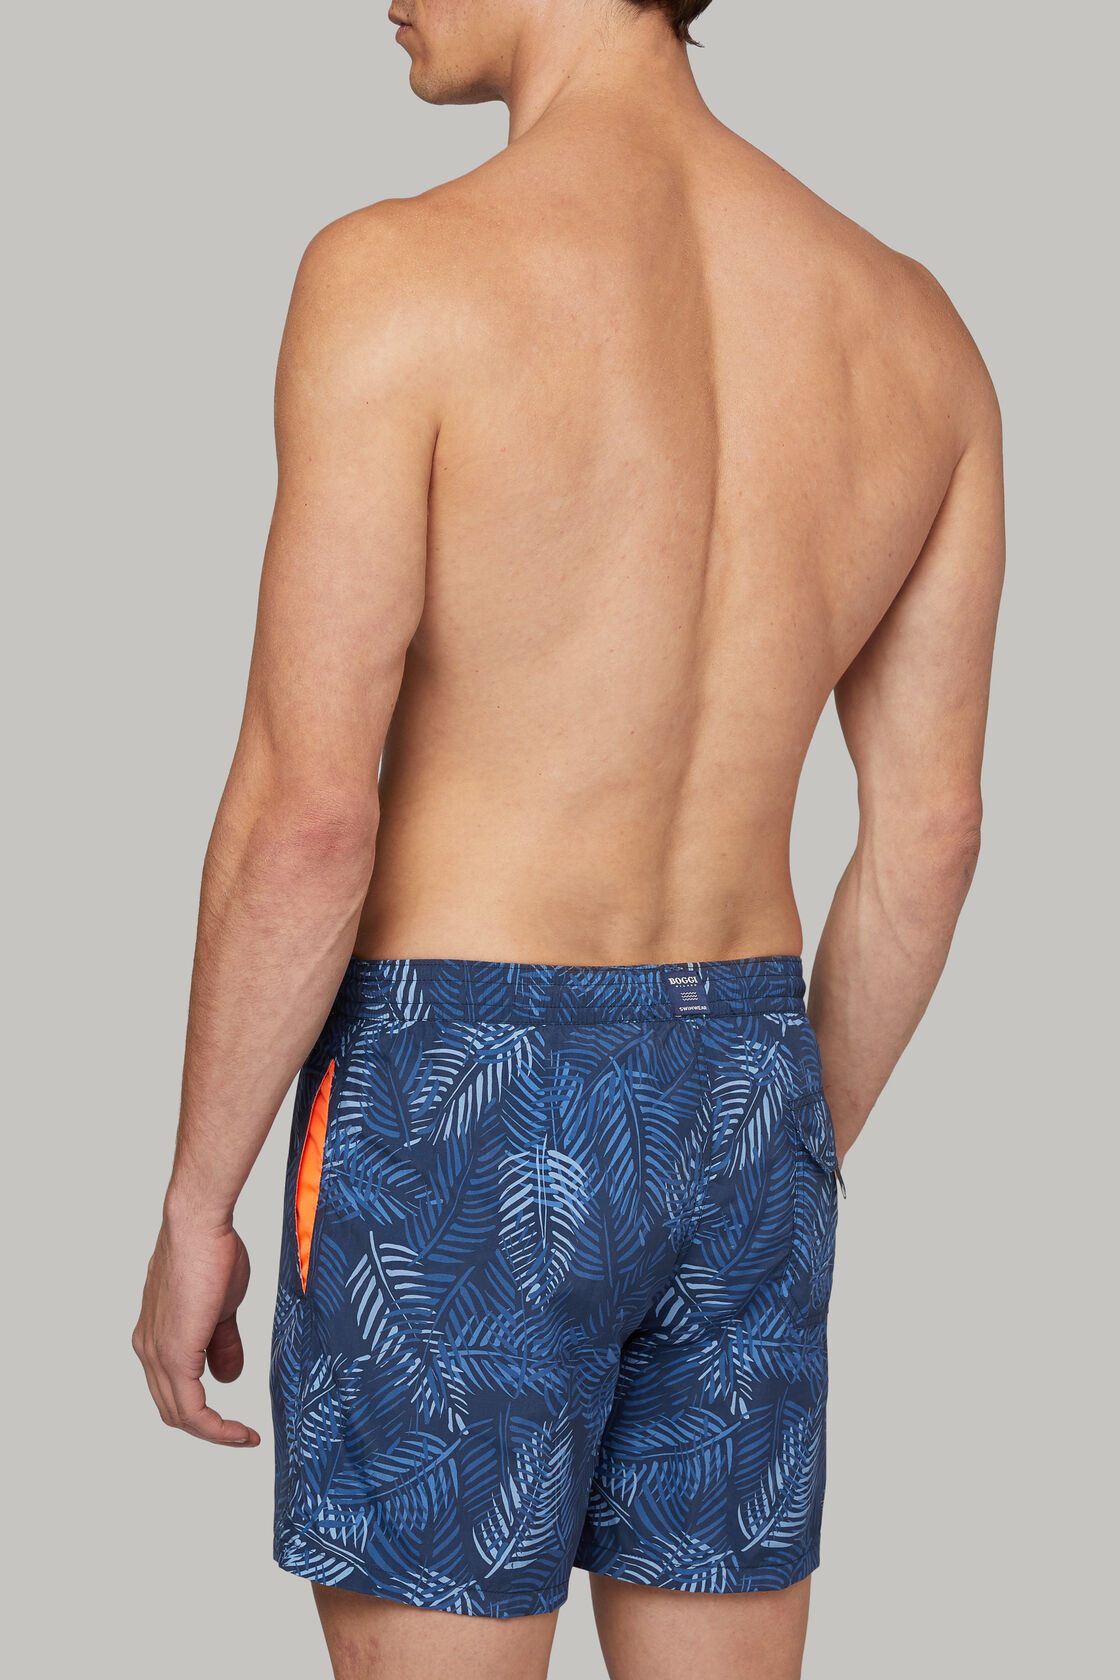 Blue Camouflage Print Swimming Trunks, , hi-res